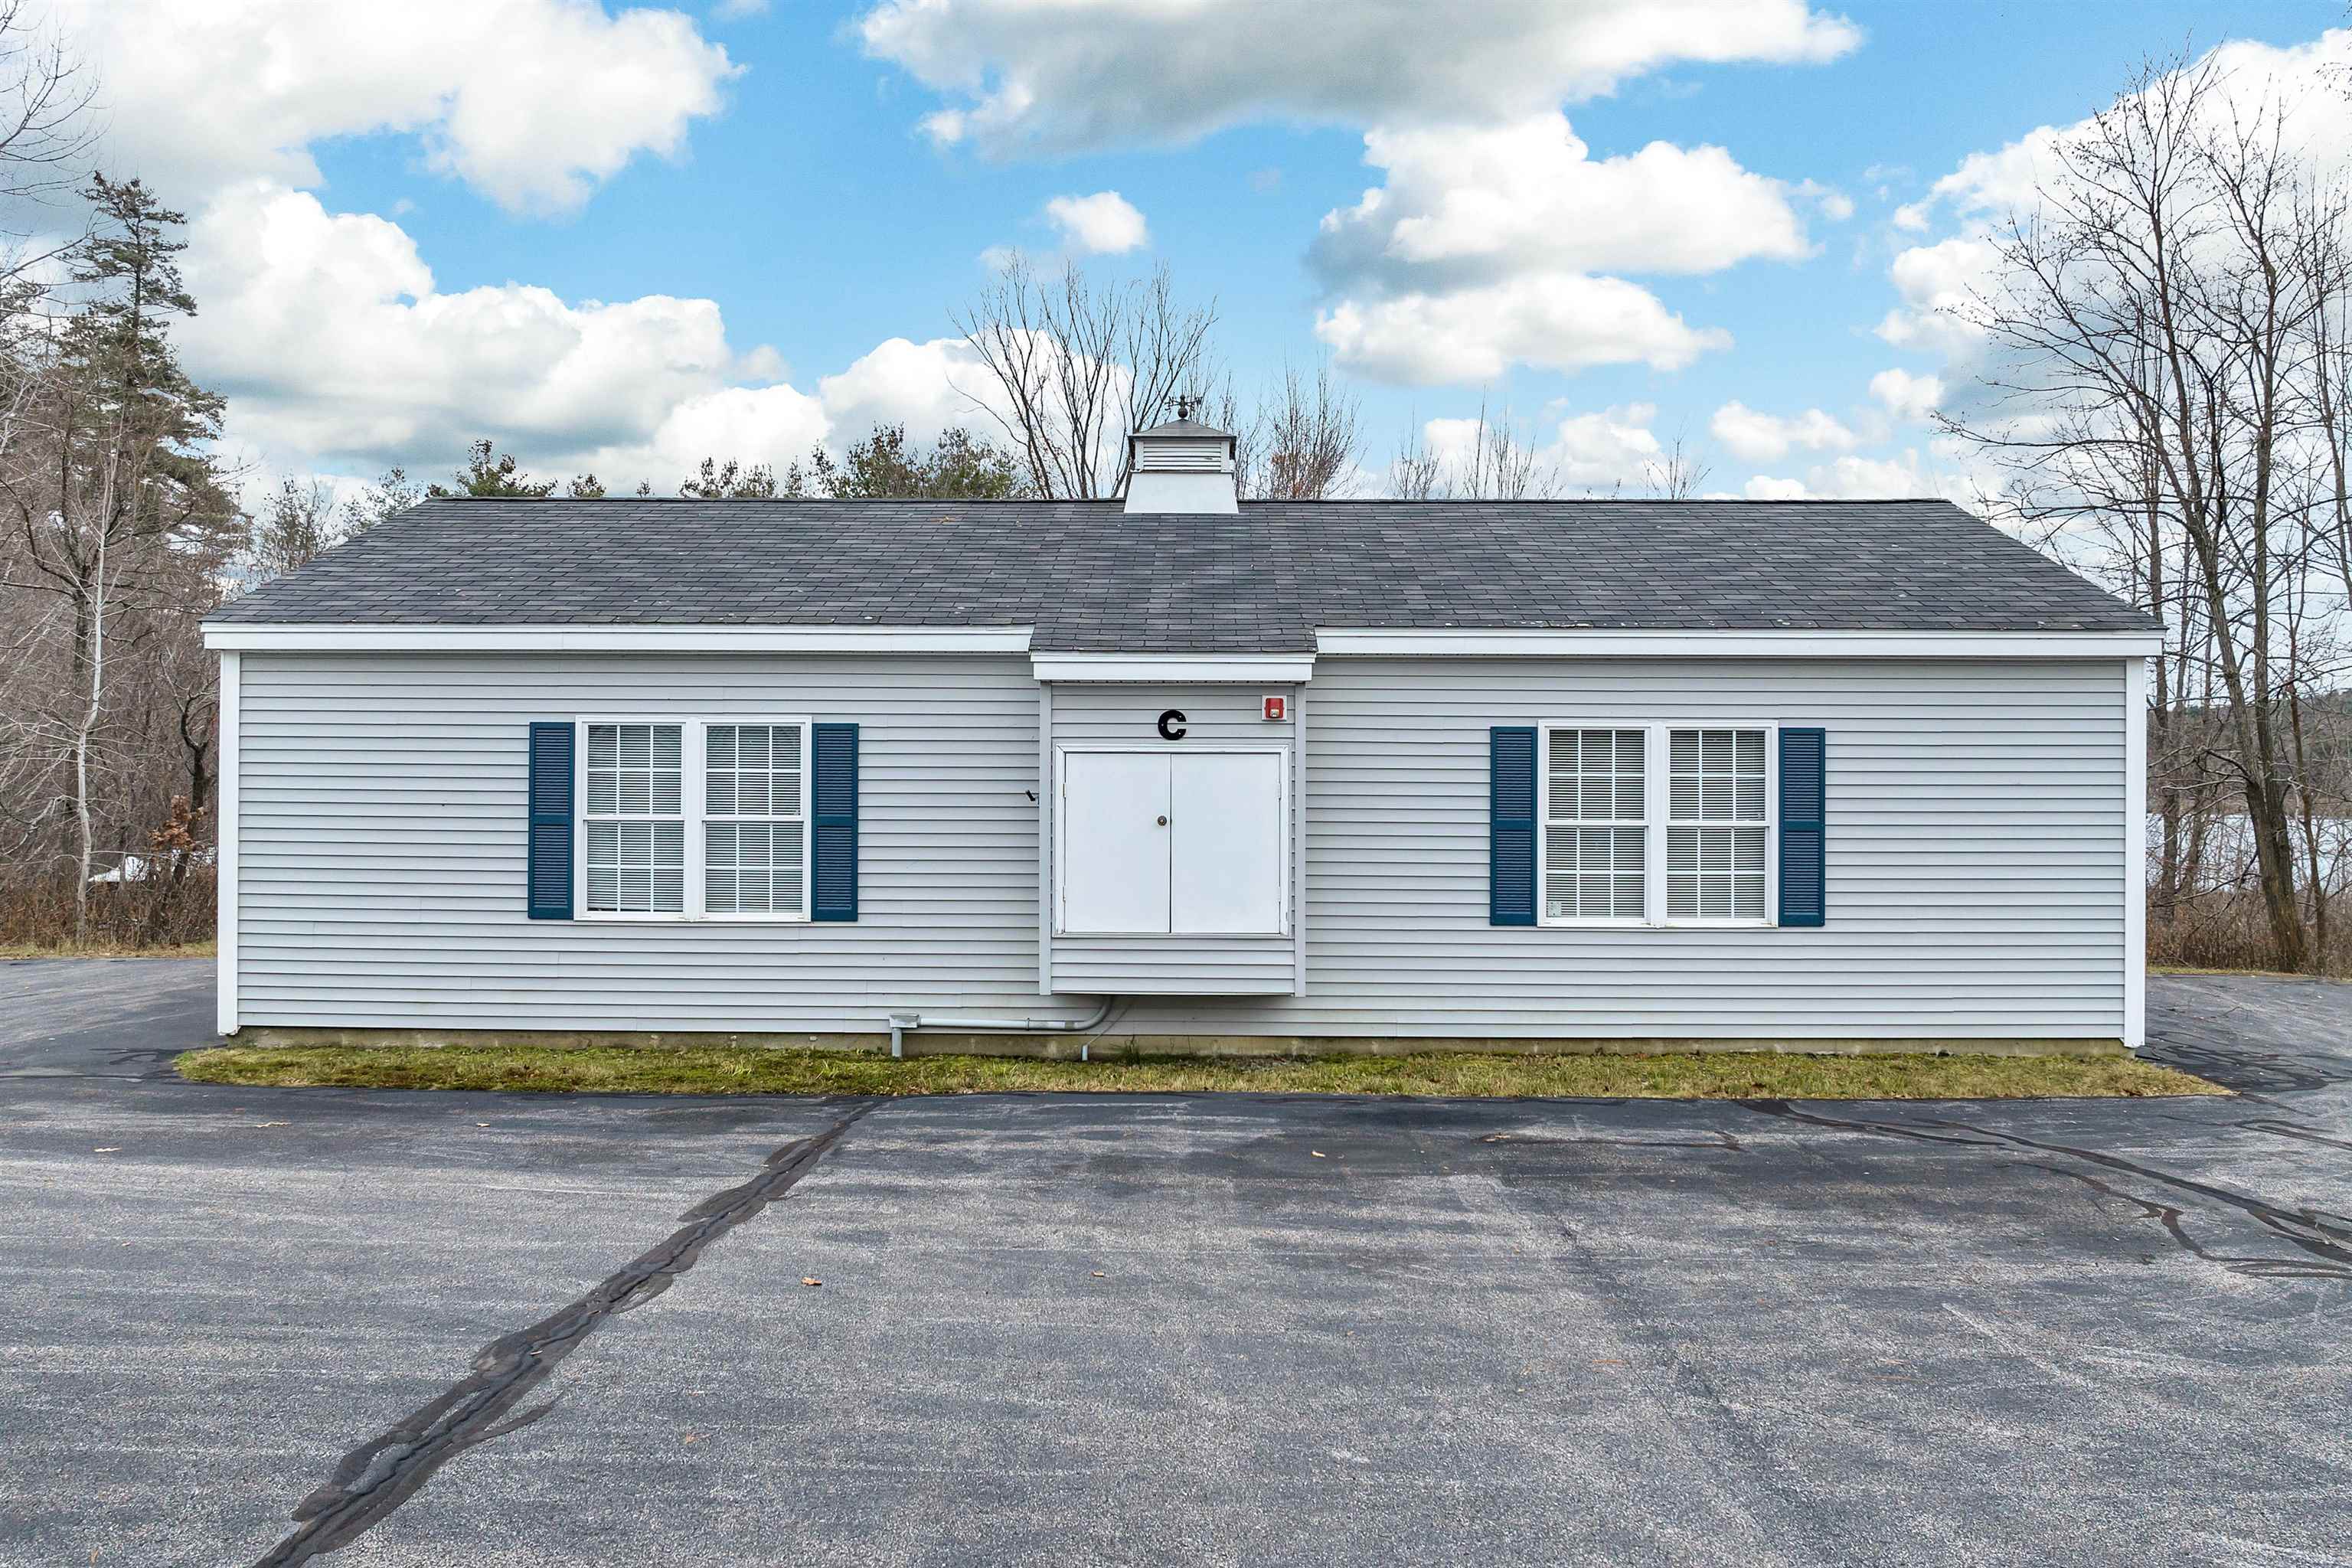 20 Waterford Place 37,38,39,40 all in Building ‘C’, Gilford, NH 03249